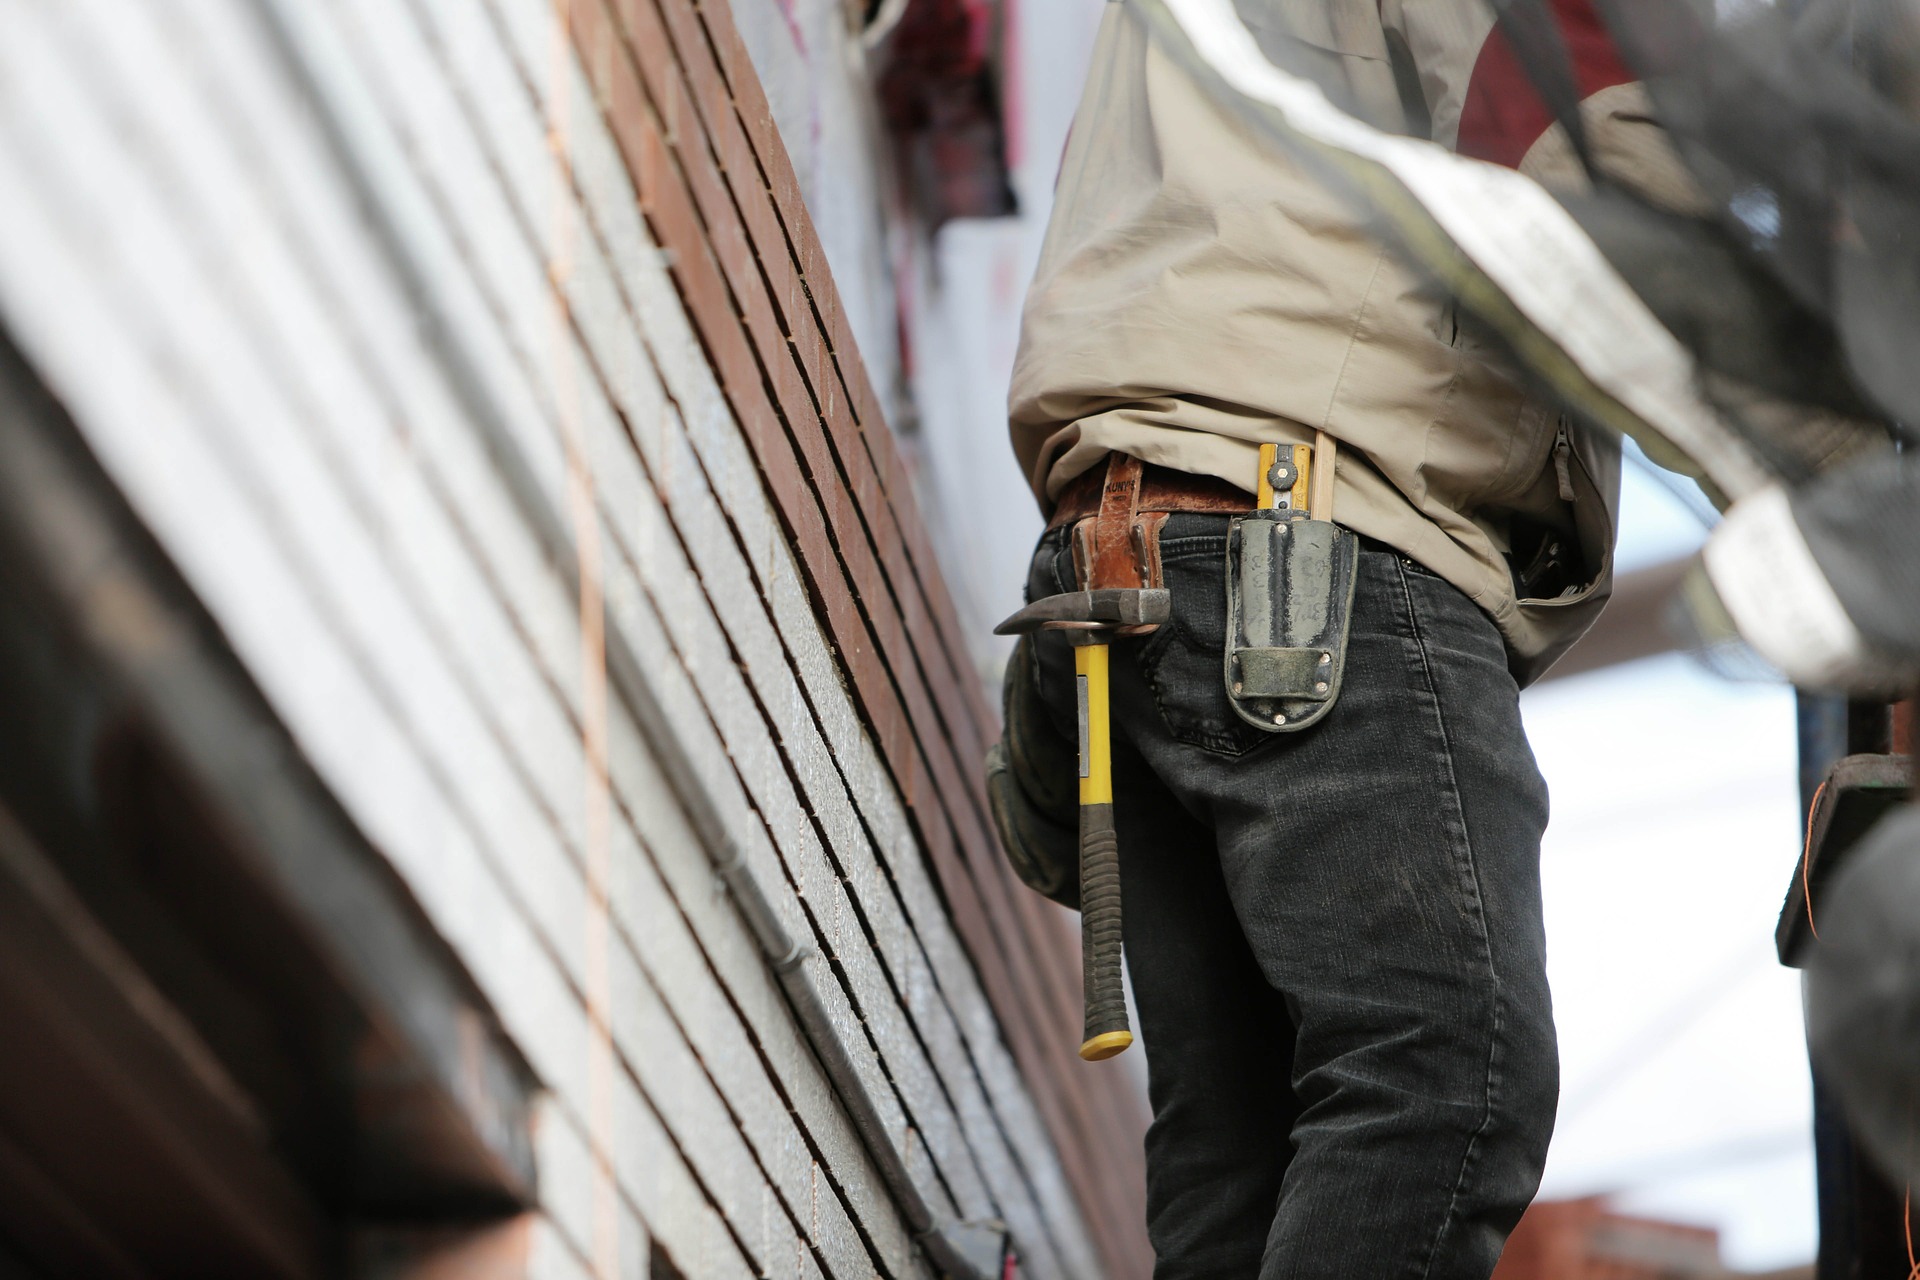 Oregon Contractor’s License: How to Become a General Contractor in Oregon